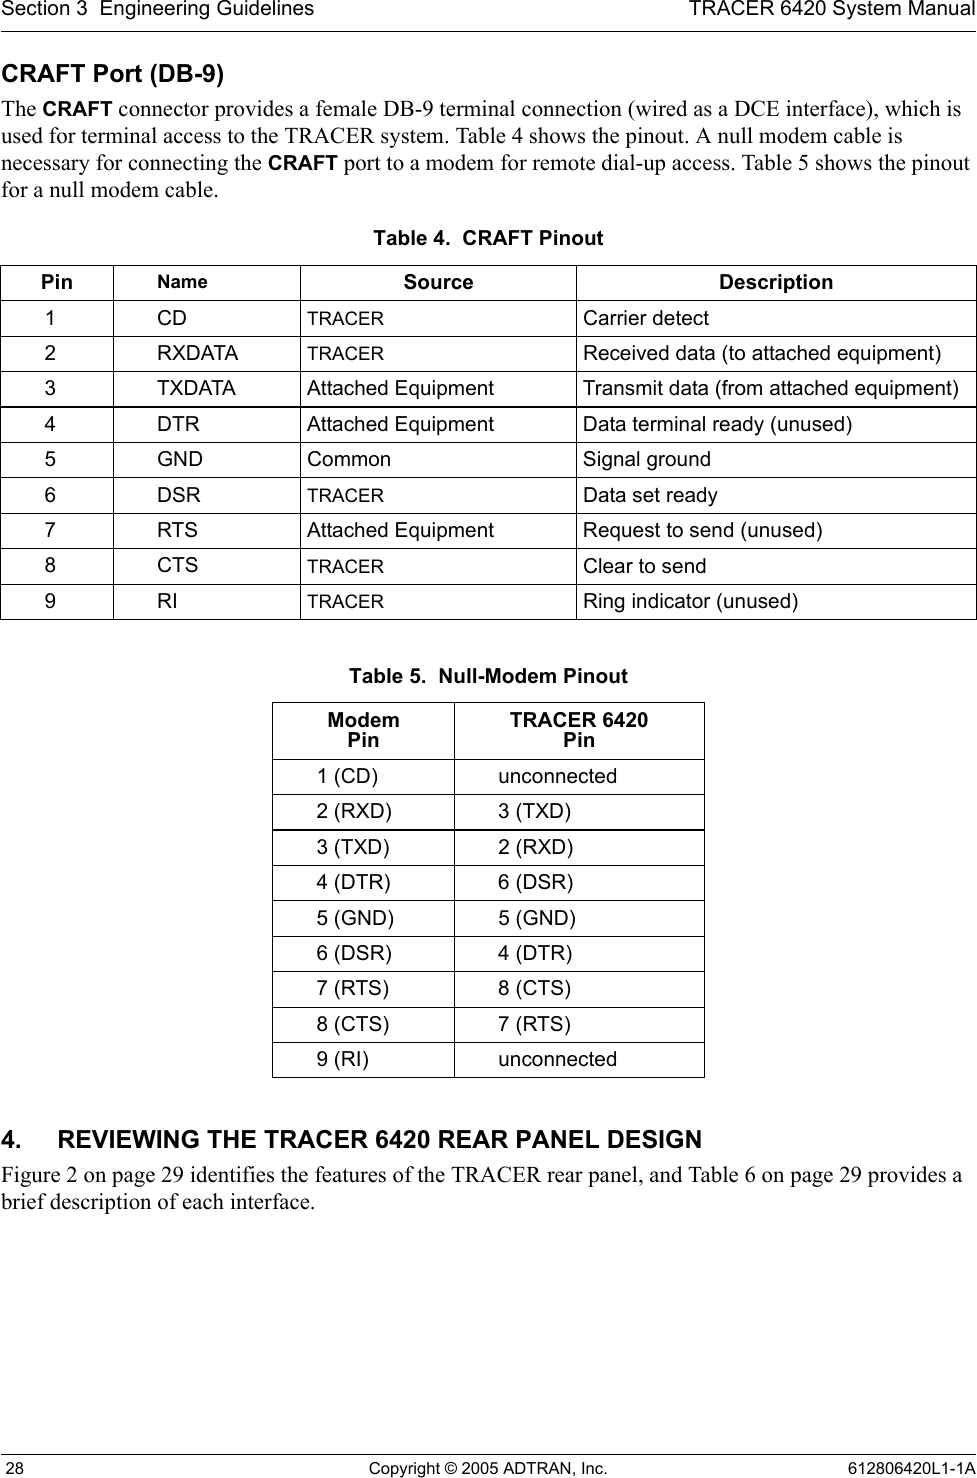 Section 3  Engineering Guidelines TRACER 6420 System Manual 28 Copyright © 2005 ADTRAN, Inc. 612806420L1-1ACRAFT Port (DB-9) The CRAFT connector provides a female DB-9 terminal connection (wired as a DCE interface), which is used for terminal access to the TRACER system. Table 4 shows the pinout. A null modem cable is necessary for connecting the CRAFT port to a modem for remote dial-up access. Table 5 shows the pinout for a null modem cable.4. REVIEWING THE TRACER 6420 REAR PANEL DESIGNFigure 2 on page 29 identifies the features of the TRACER rear panel, and Table 6 on page 29 provides a brief description of each interface. Table 4.  CRAFT Pinout Pin Name Source Description1CD TRACER Carrier detect2RXDATATRACER Received data (to attached equipment)3 TXDATA Attached Equipment Transmit data (from attached equipment)4 DTR Attached Equipment Data terminal ready (unused)5 GND Common Signal ground6DSR TRACER Data set ready7 RTS Attached Equipment Request to send (unused)8CTS TRACER Clear to send9RI TRACER Ring indicator (unused)Table 5.  Null-Modem Pinout ModemPinTRACER 6420Pin1 (CD) unconnected2 (RXD) 3 (TXD)3 (TXD) 2 (RXD)4 (DTR) 6 (DSR)5 (GND) 5 (GND)6 (DSR) 4 (DTR)7 (RTS) 8 (CTS)8 (CTS) 7 (RTS)9 (RI) unconnected